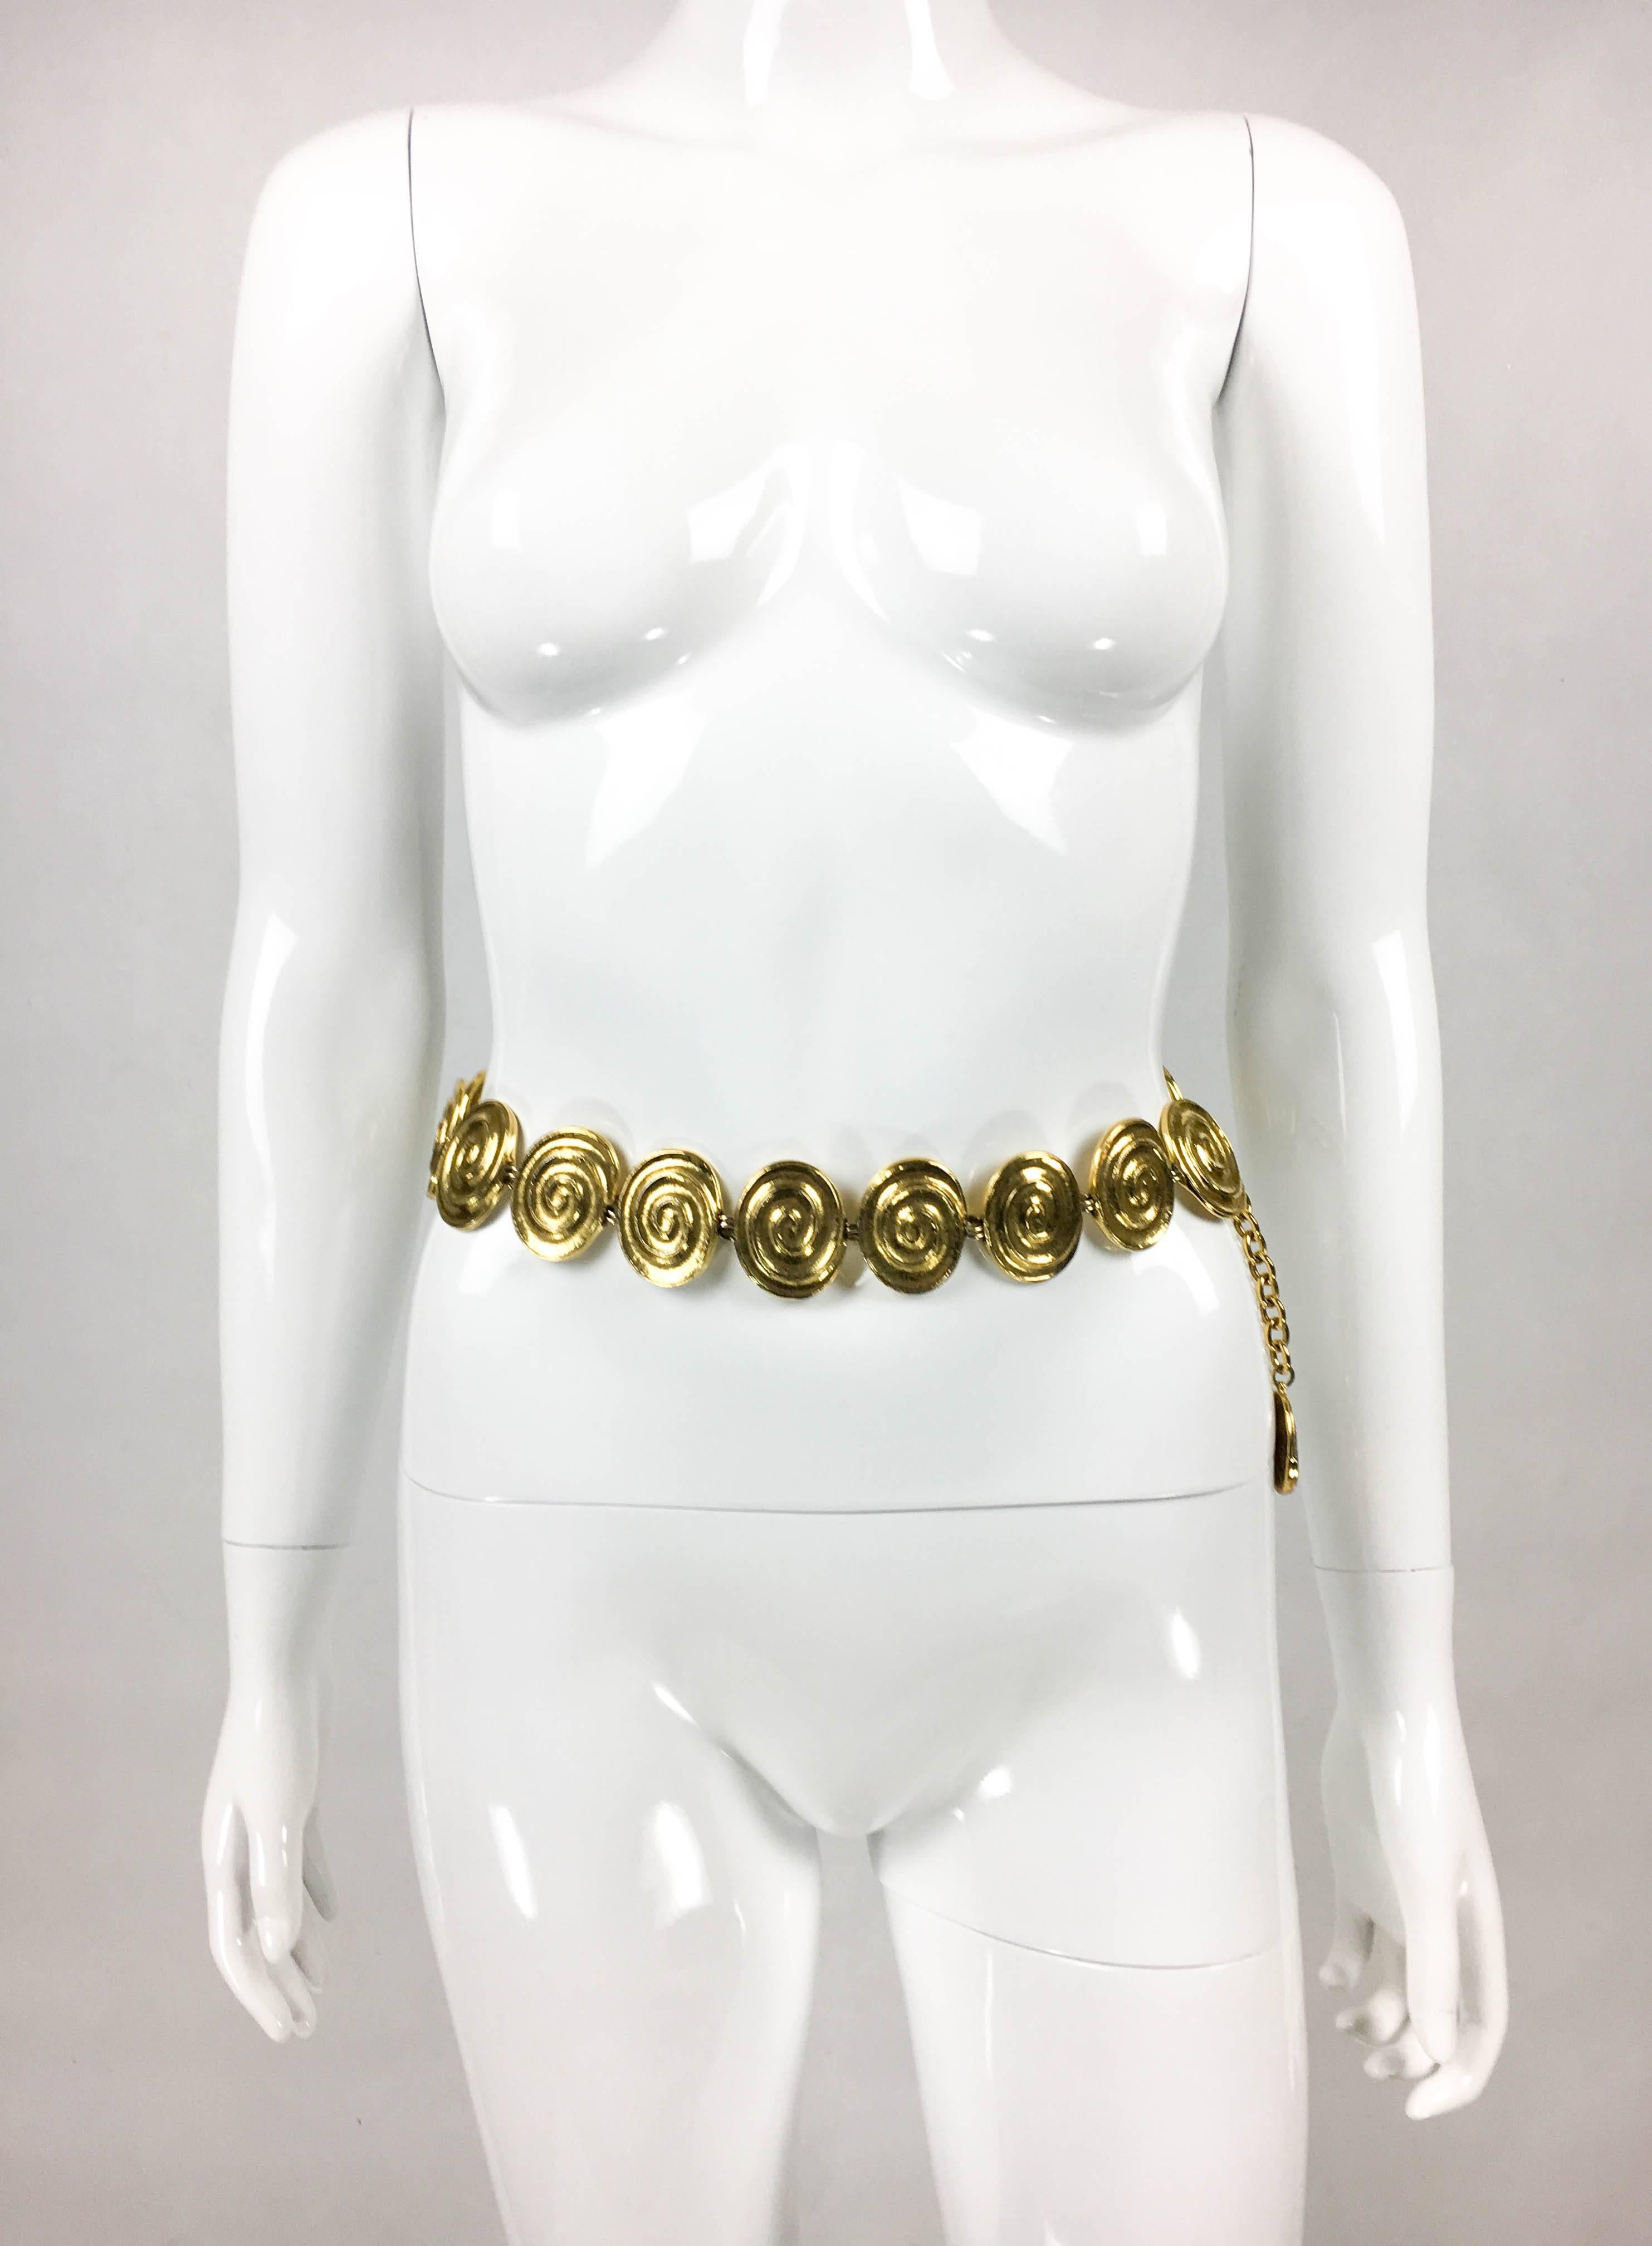 Striking Yves Saint Laurent Vintage Gold-Tone Belt / Necklace. This amazing piece by Yves Saint Laurent dates back from the 1980’s. Gold-Plated, it exudes the bold aesthetics that characterised that decade. Swirl-shaped, the links resemble nautilus